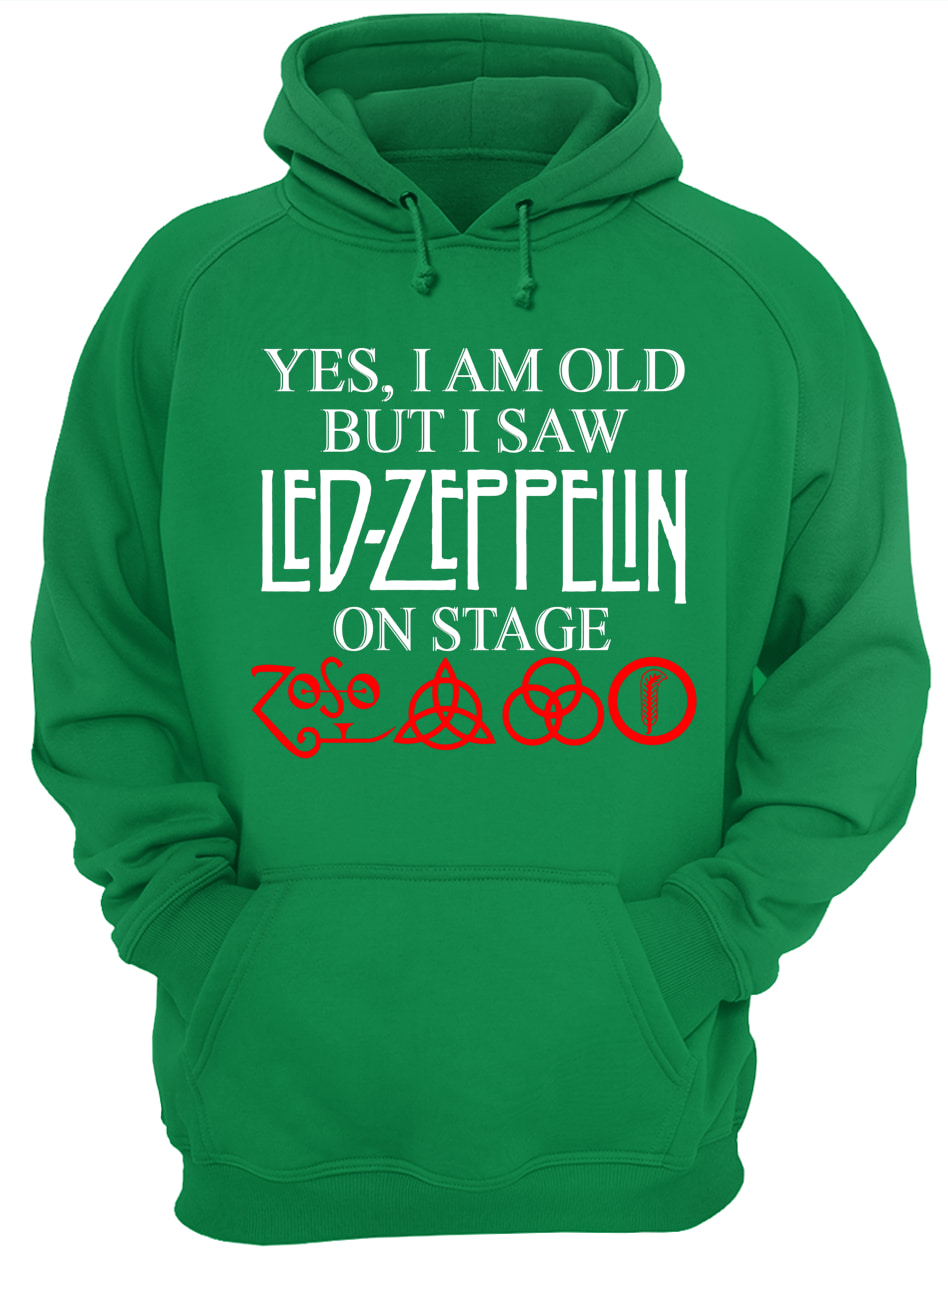 Yes i am old but i saw led-zeppelin on stage hoodie